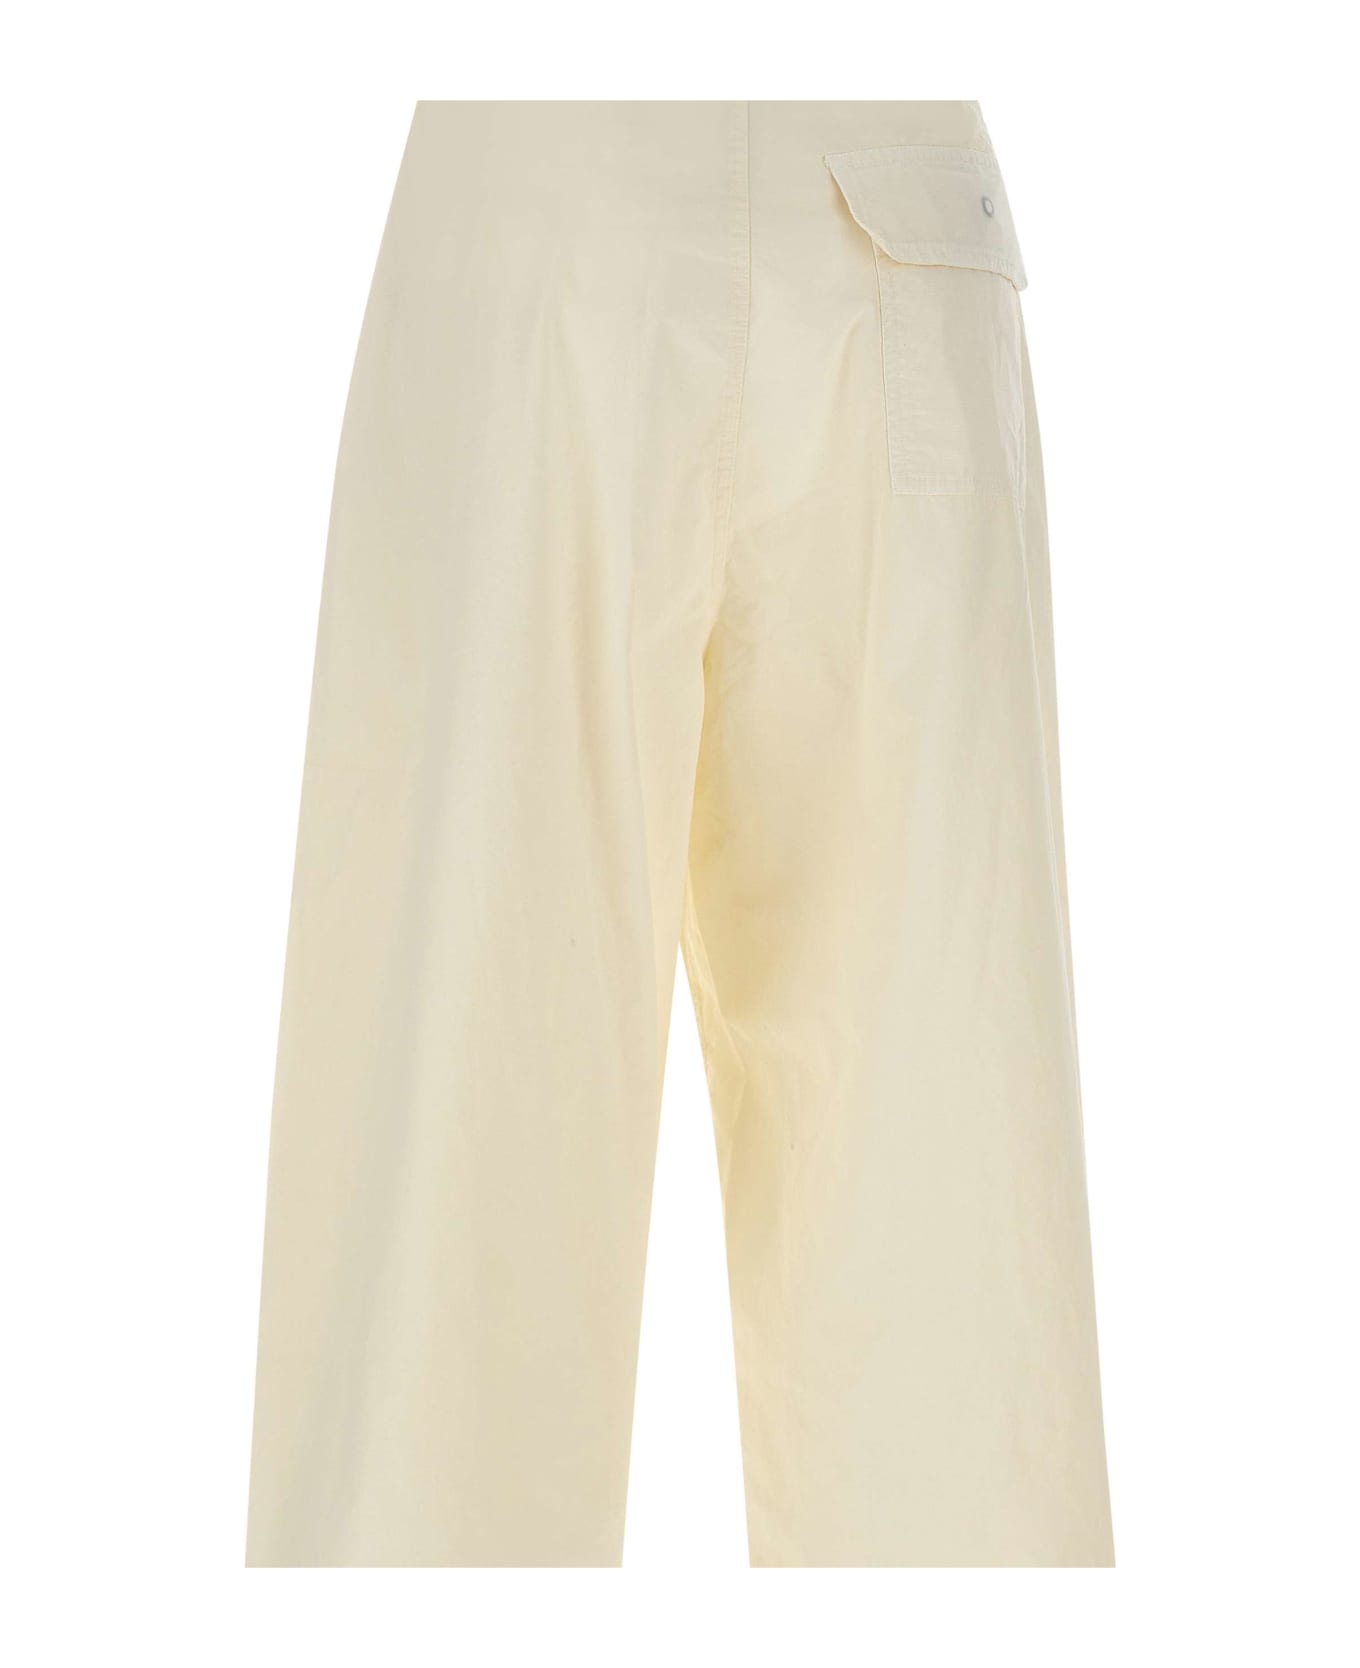 Autry 'main Wom Apparel' Trousers Cotton Poplin - WHITE ボトムス